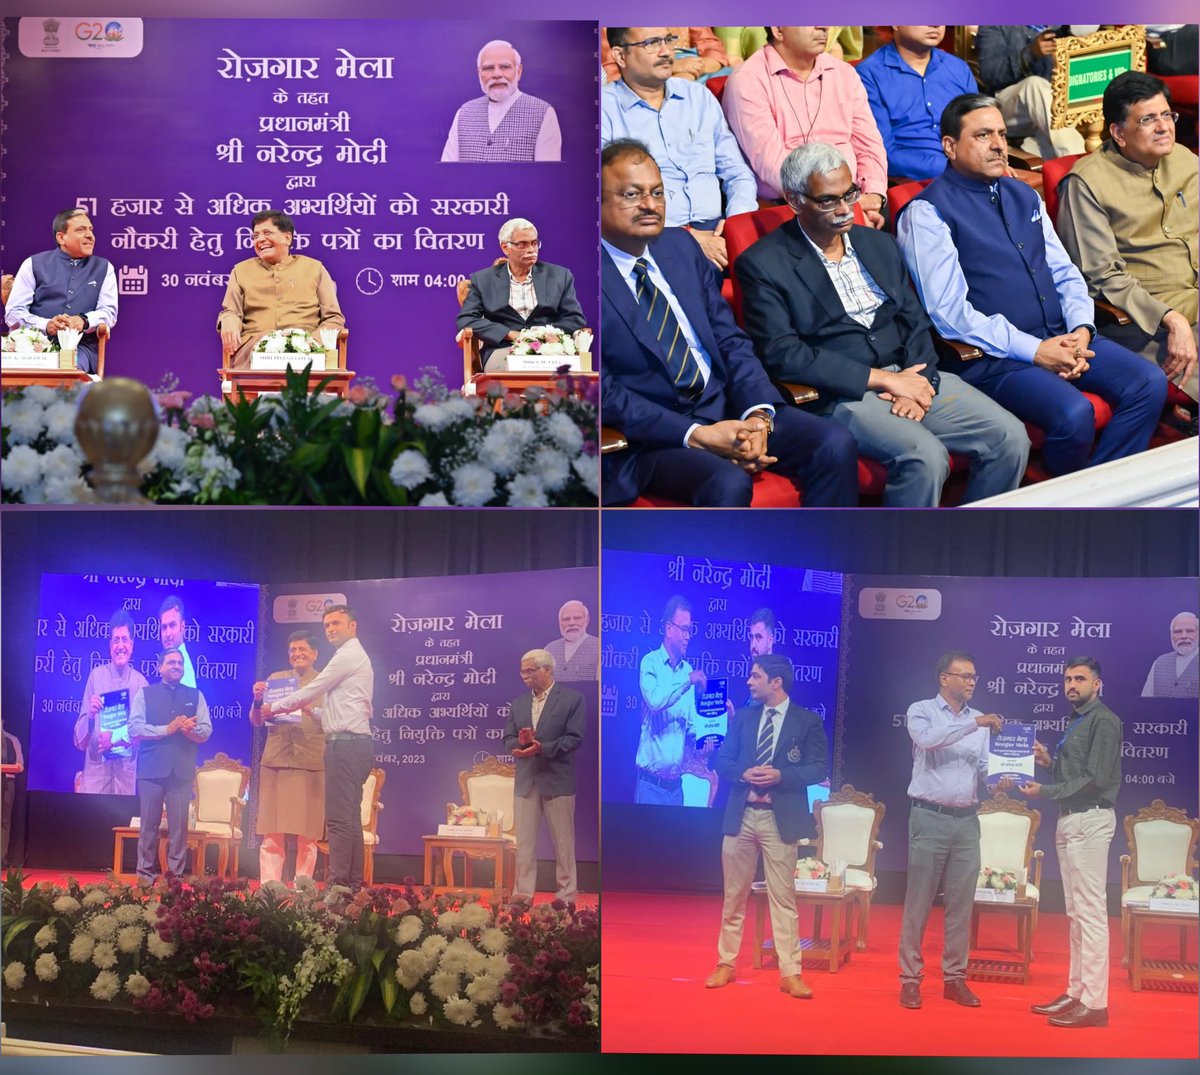 CGST Mumbai Zone participated in the 11th tranche of the#RozgarMela held on 30.11.2023 at Opera House, Mumbai.Hon’ble Cabinet Minister,Shri Piyush Goyal was the Chief Guest and distributed appointment letters .⁦@cbic_india⁩ ⁦⁦@nsitharamanoffc⁩⁦⁦@PMOIndia⁩